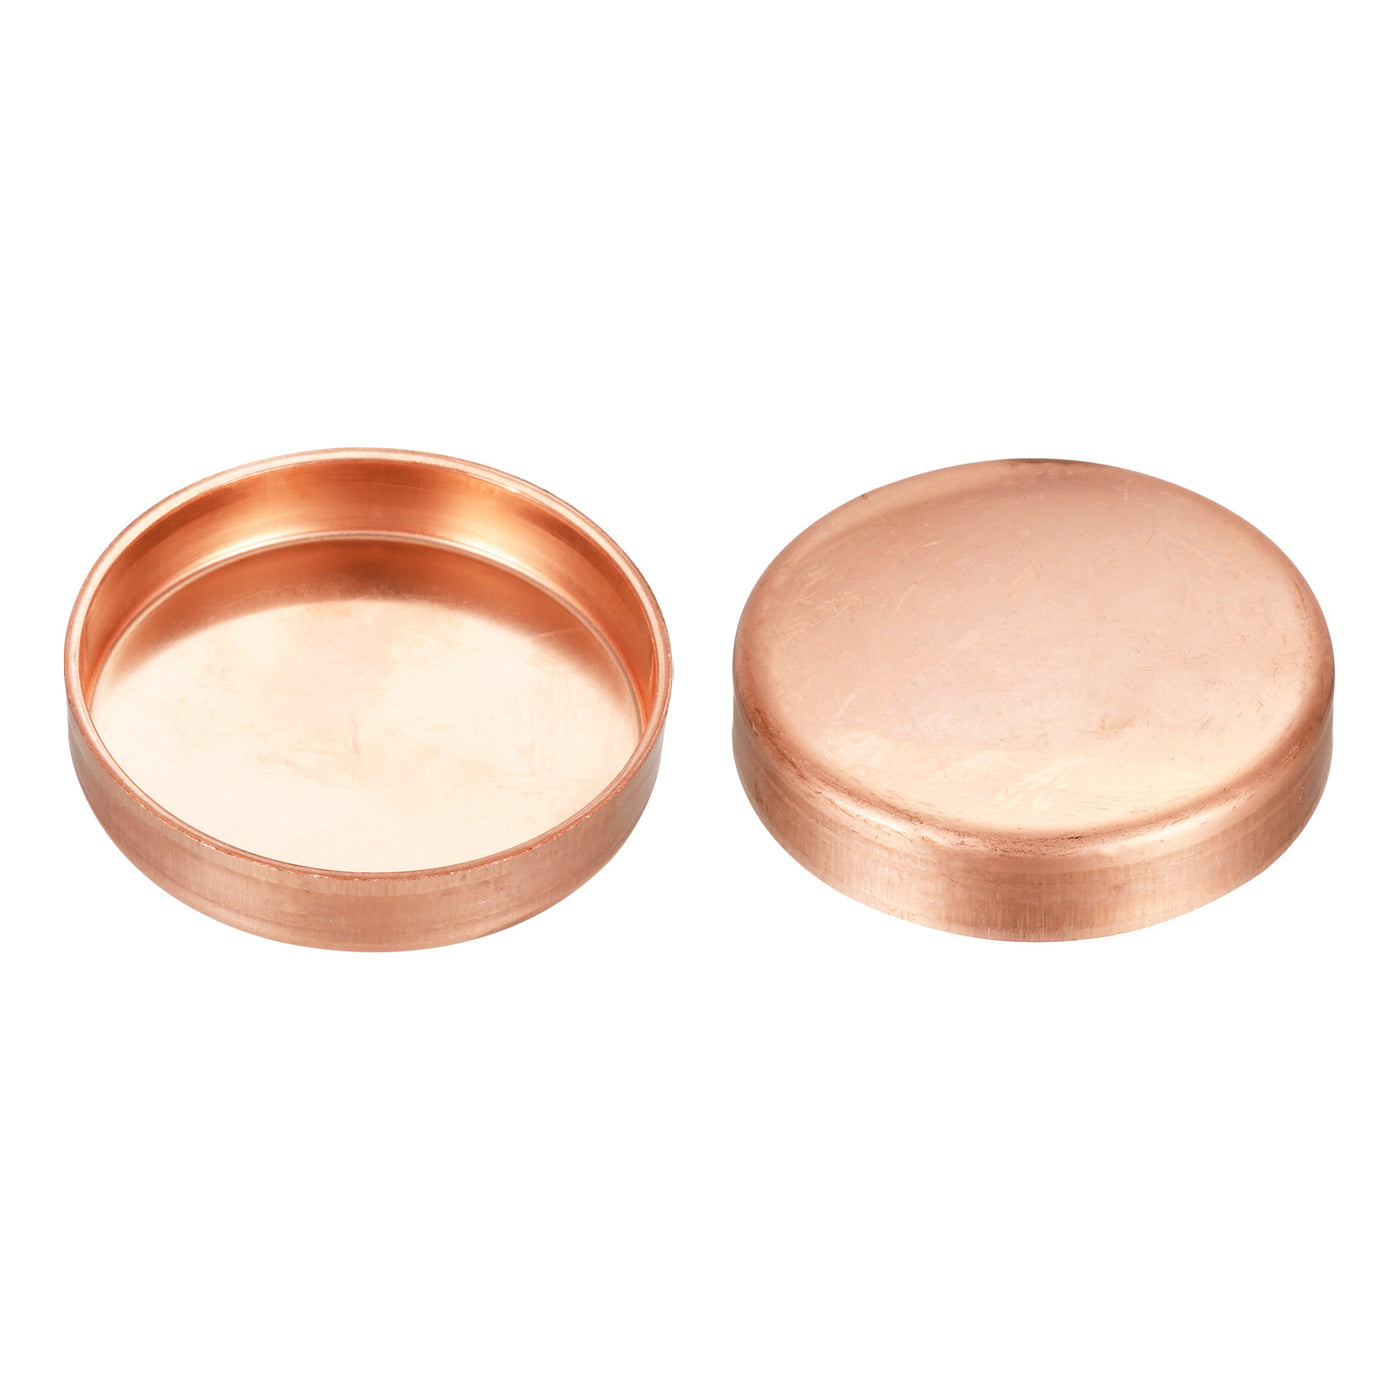 Harfington Copper End Cap Pipe Fitting Sweat Plug Connection 67mm ID for HVAC, Air Conditioning Refrigeration System